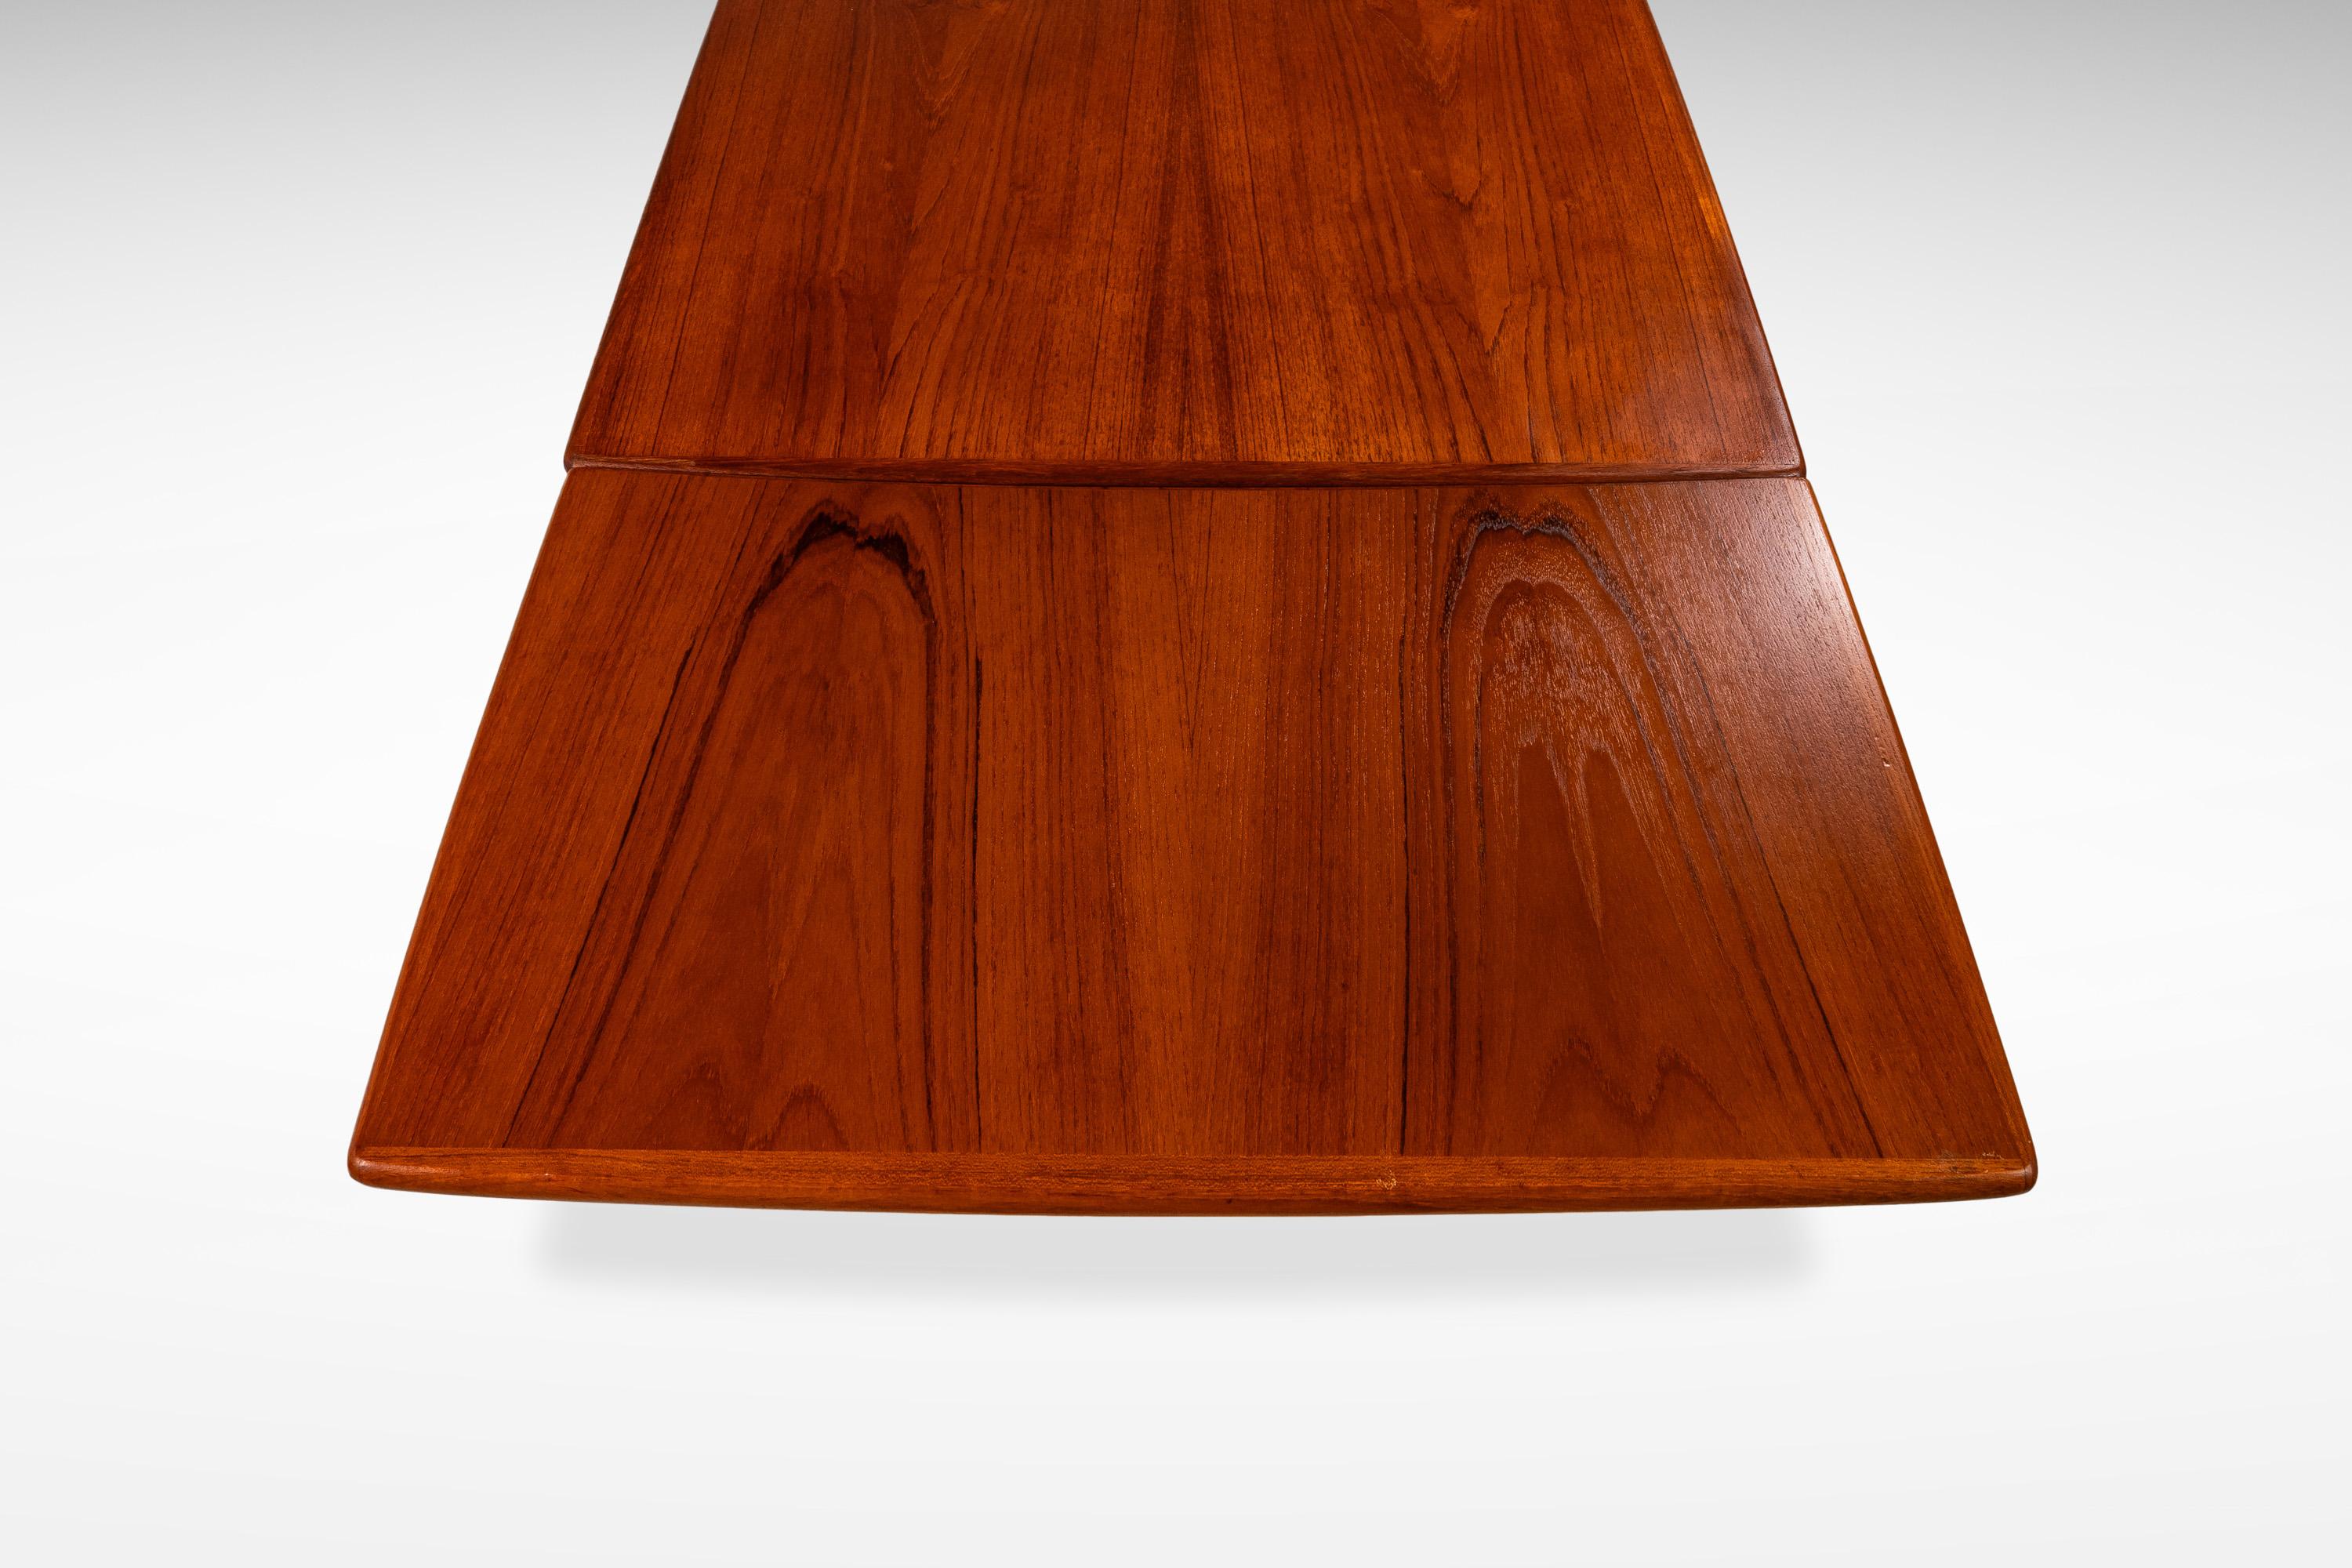 Danish Modern Expansion Dining Table in Teak w/ Stow-In-Table Leaves, c. 1960s For Sale 6